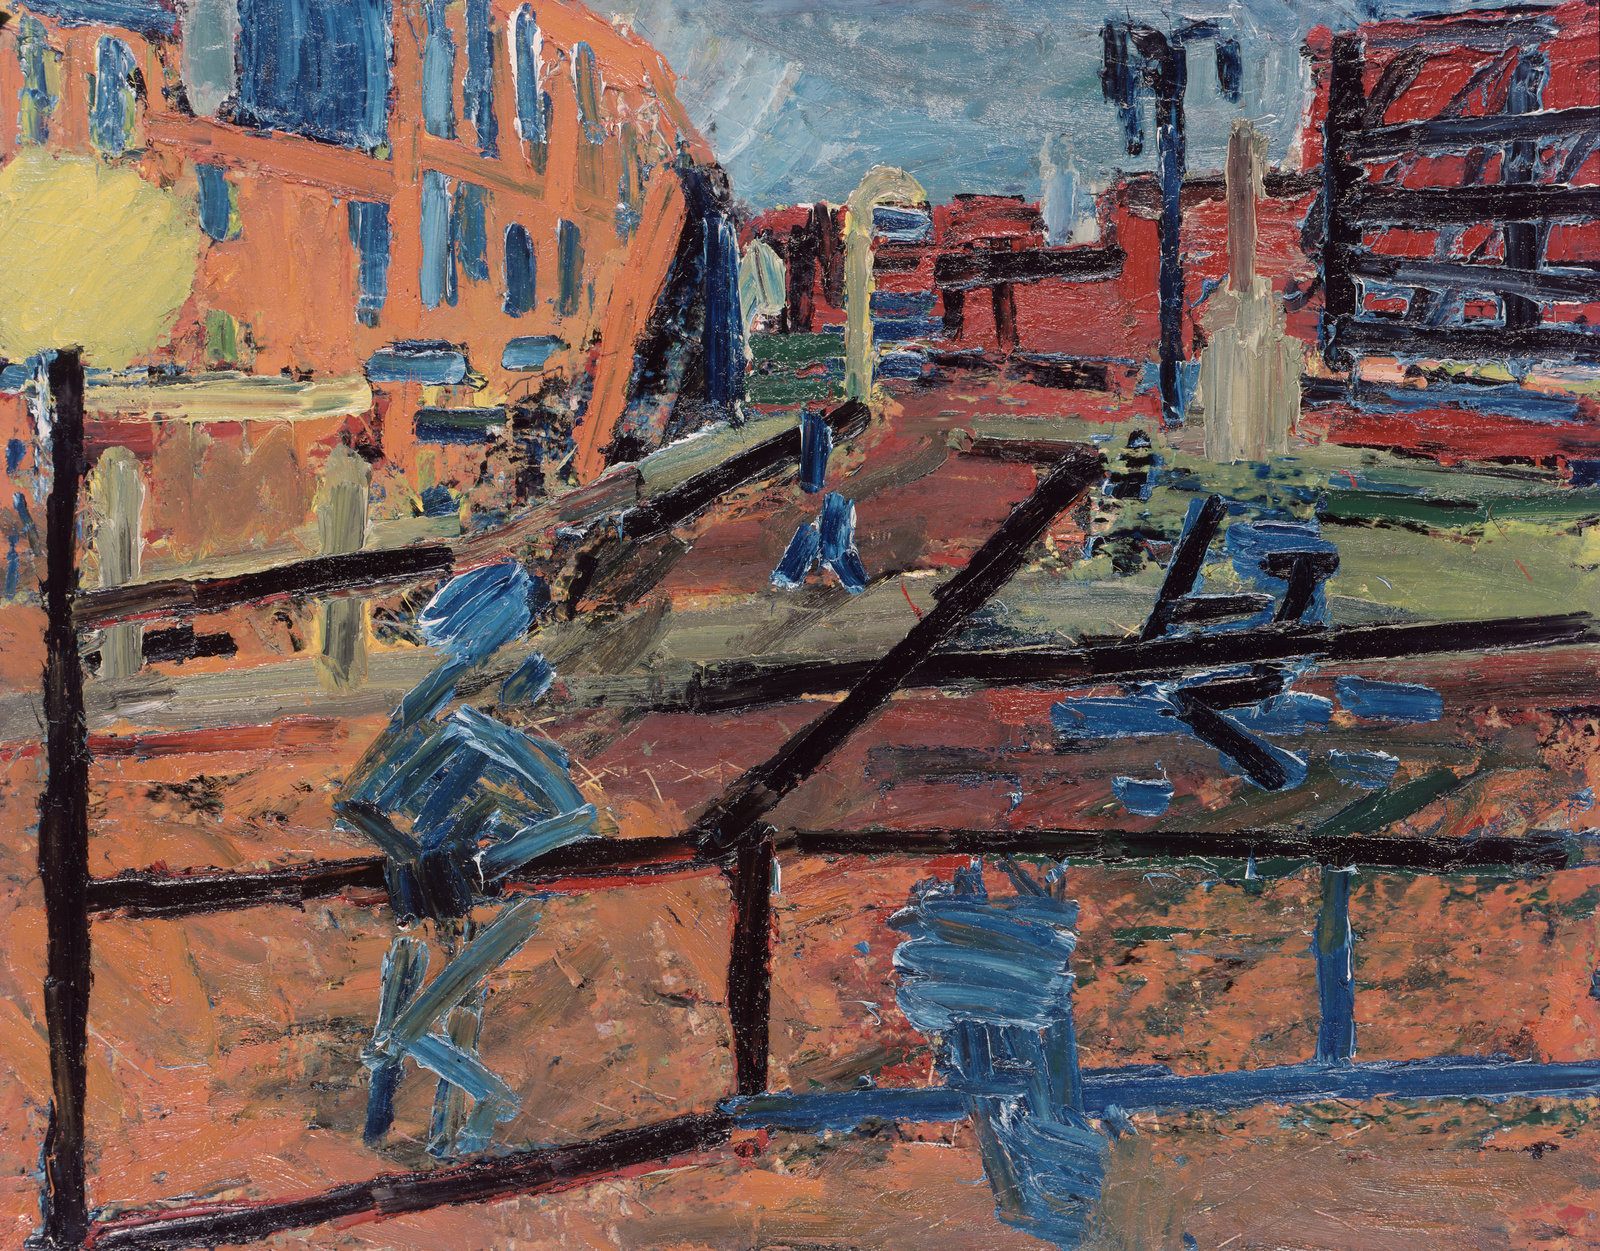 Artist Frank Auerbach Exhibition, Art for Sale and Biography